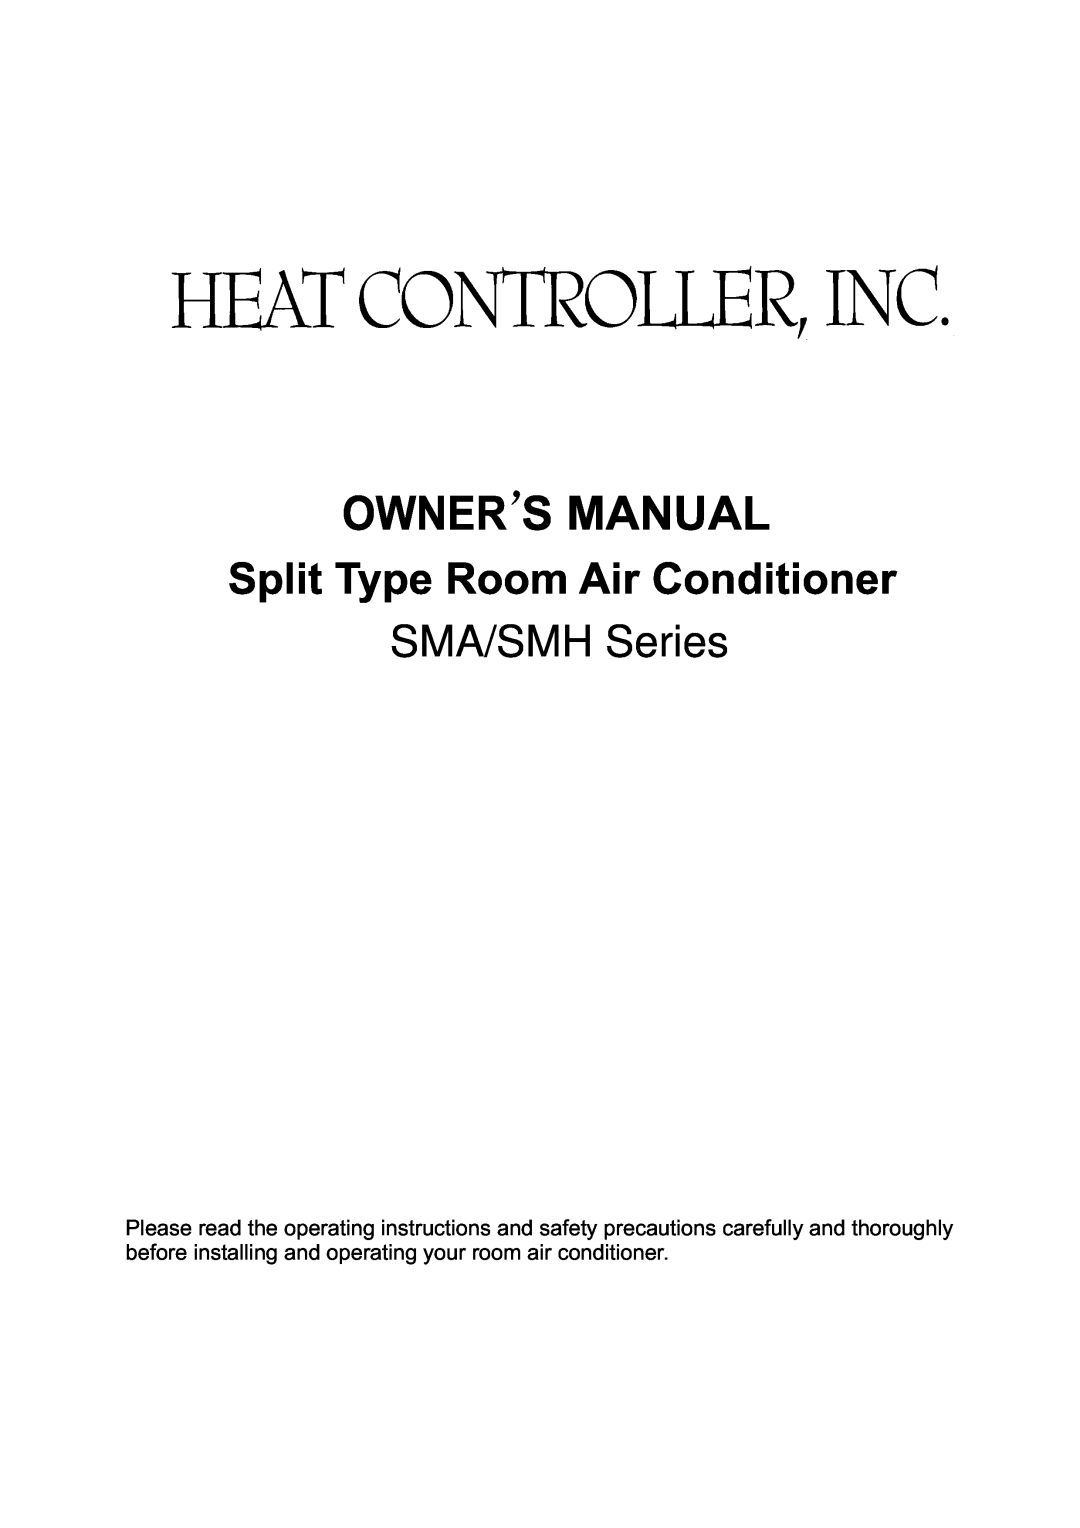 Heat Controller owner manual Owners, Split ype, SMA/SMH Series 